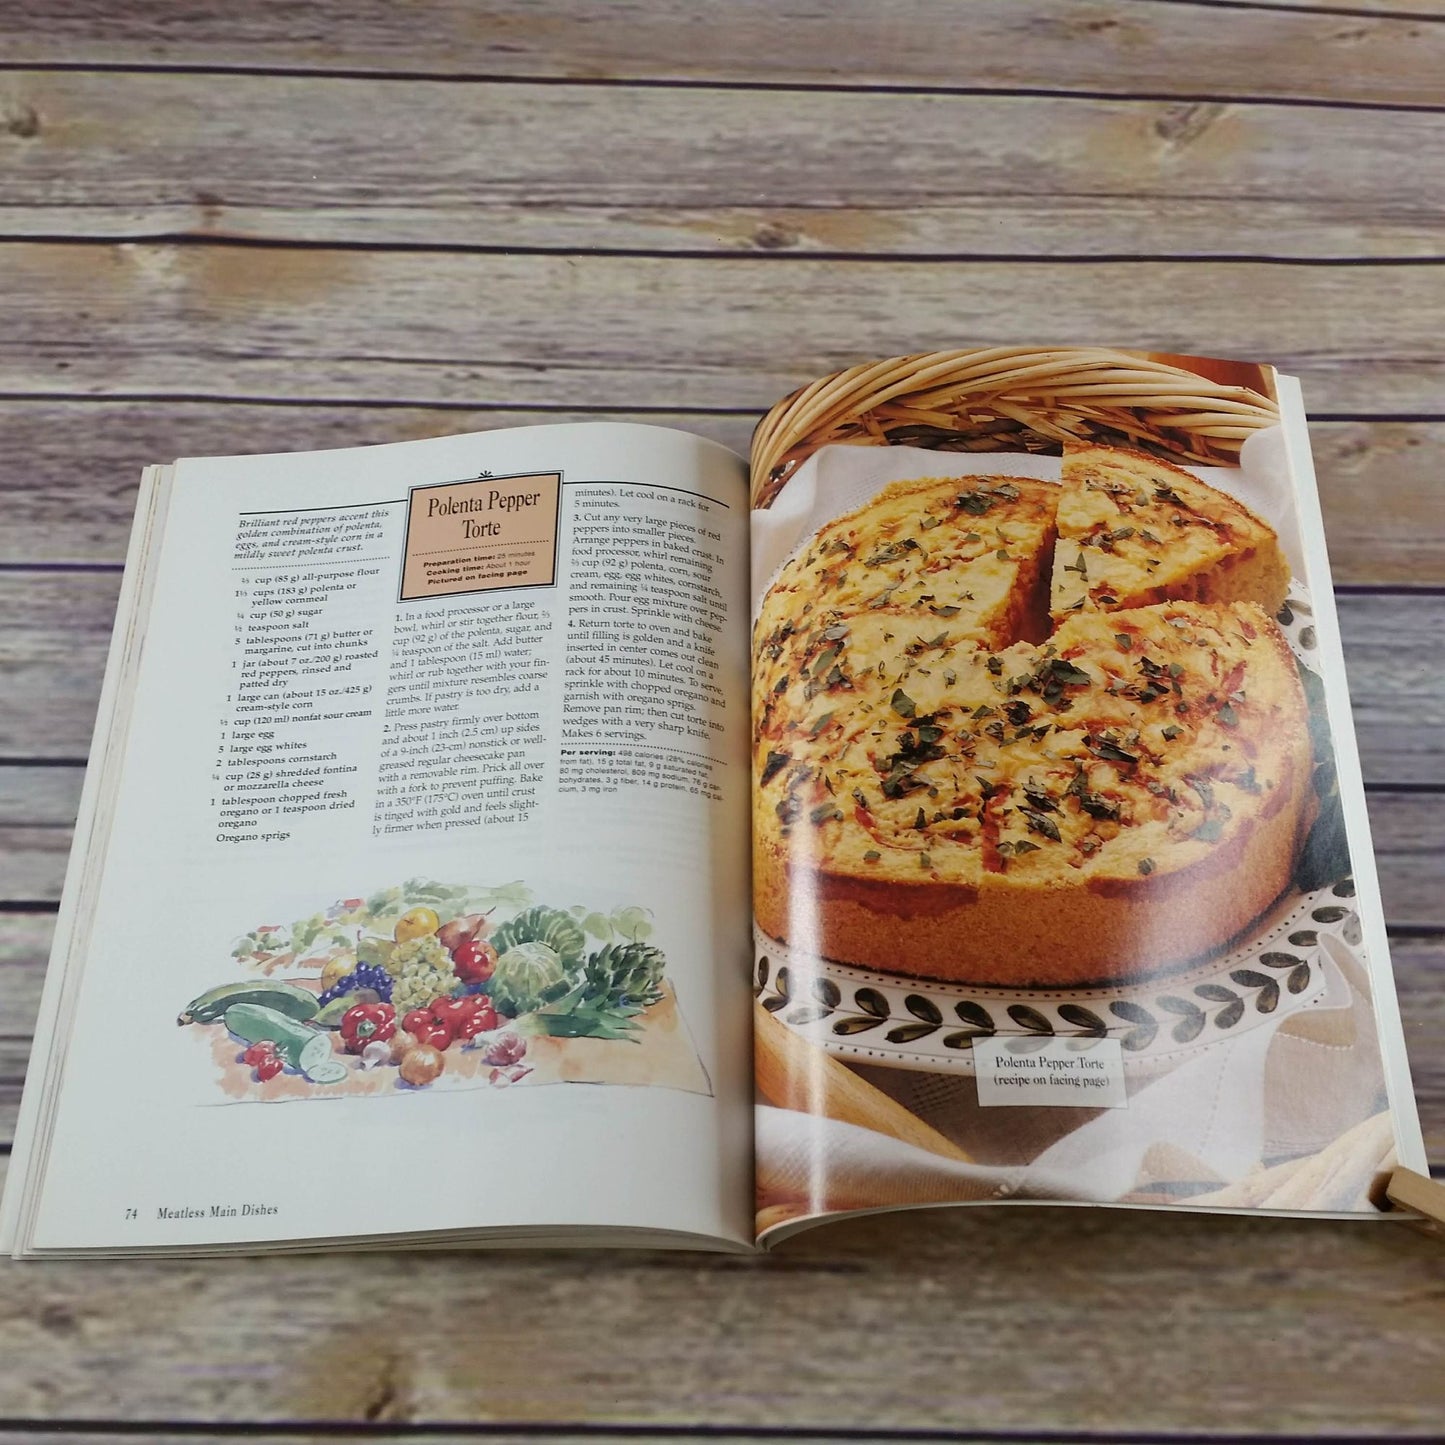 Sunset Low Fat Italian Cook Book Recipes For Healthy Eating 1996 Paperback Pasta Salad Vintage Dessert